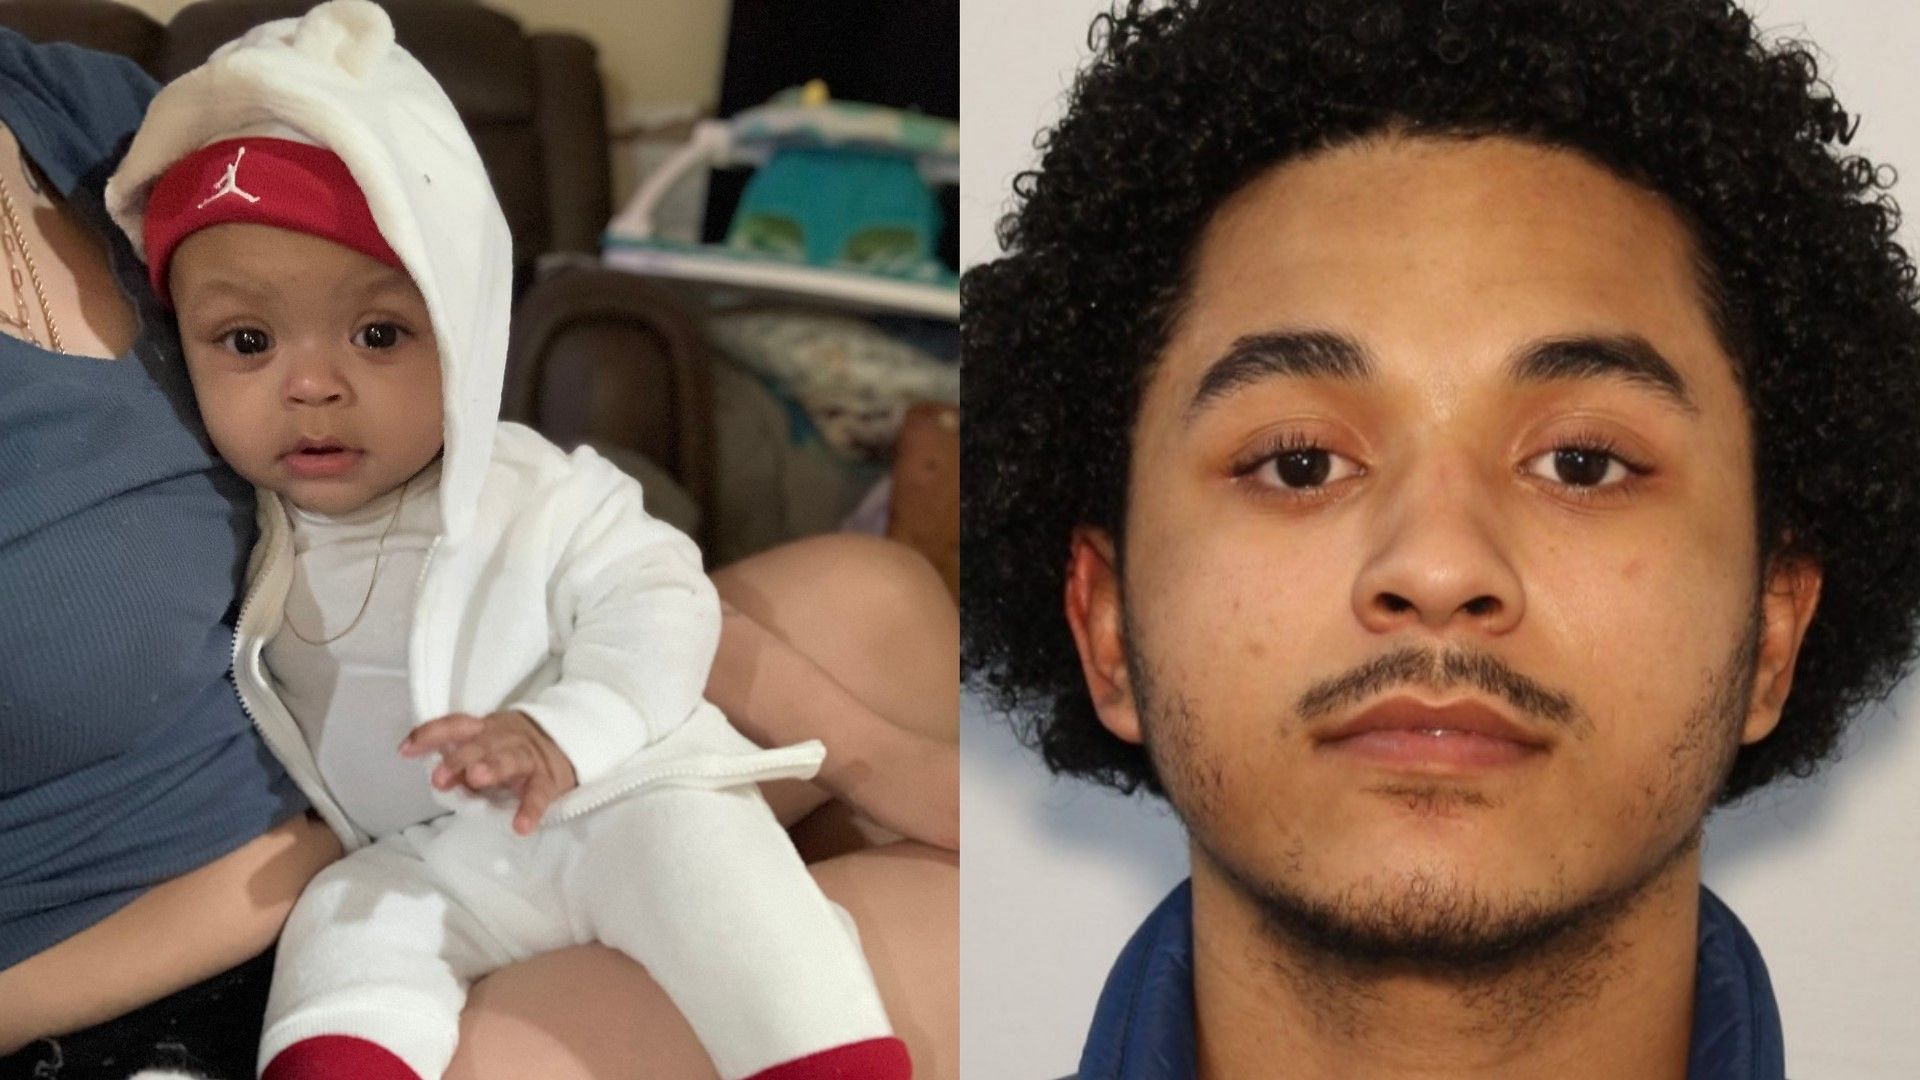 Eight-month-old child, Ahmiri Chaney (left) reportedly abducted by father Eric Chaney Jr. (right). (Images via Twitter/@AKAmberAlerts)